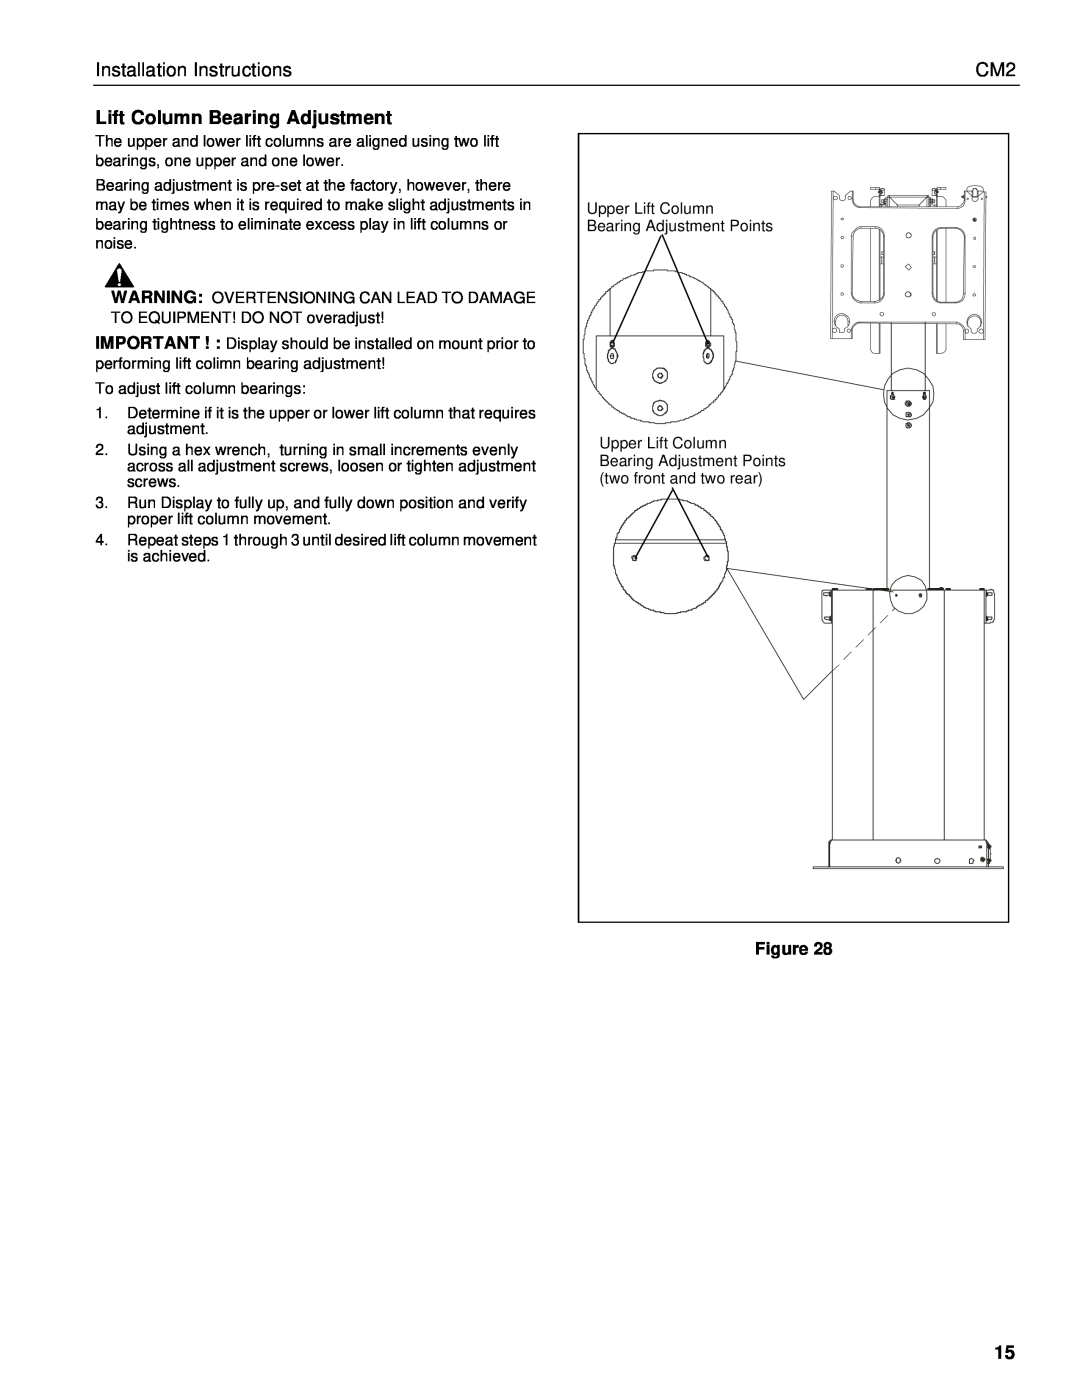 Chief Manufacturing CM2 installation instructions Lift Column Bearing Adjustment, Installation Instructions 